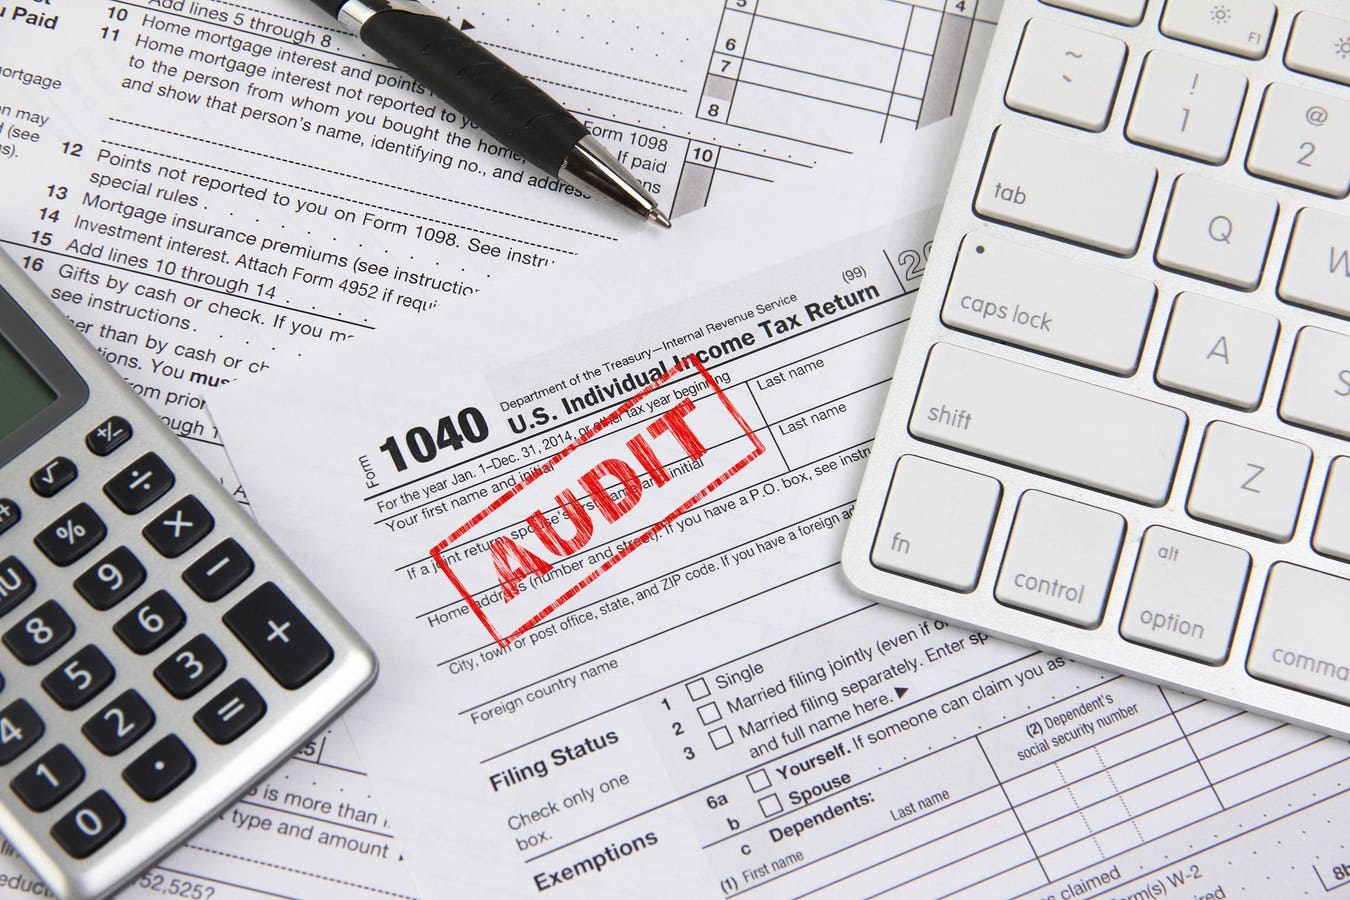 Tax Return Disclosures Avoid IRS Penalties, Ease Or Prevent Audits